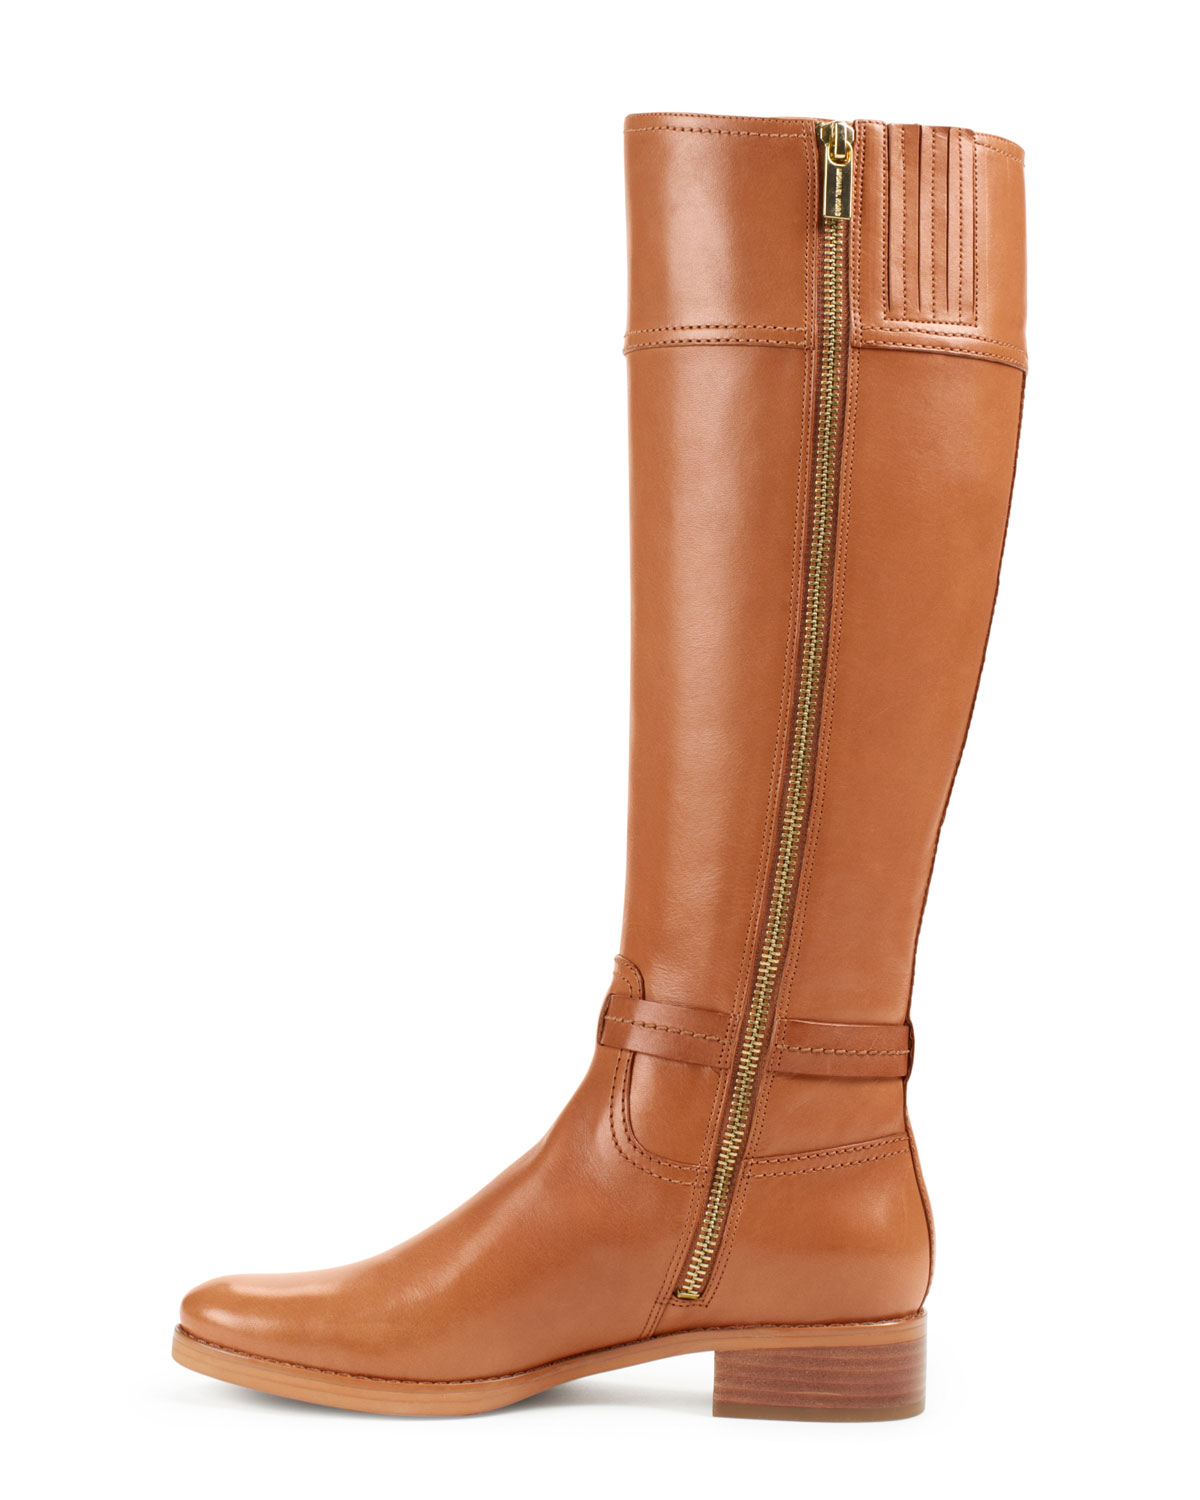 Lyst - Michael Kors Michael Stockard Leather Riding Boot in Brown